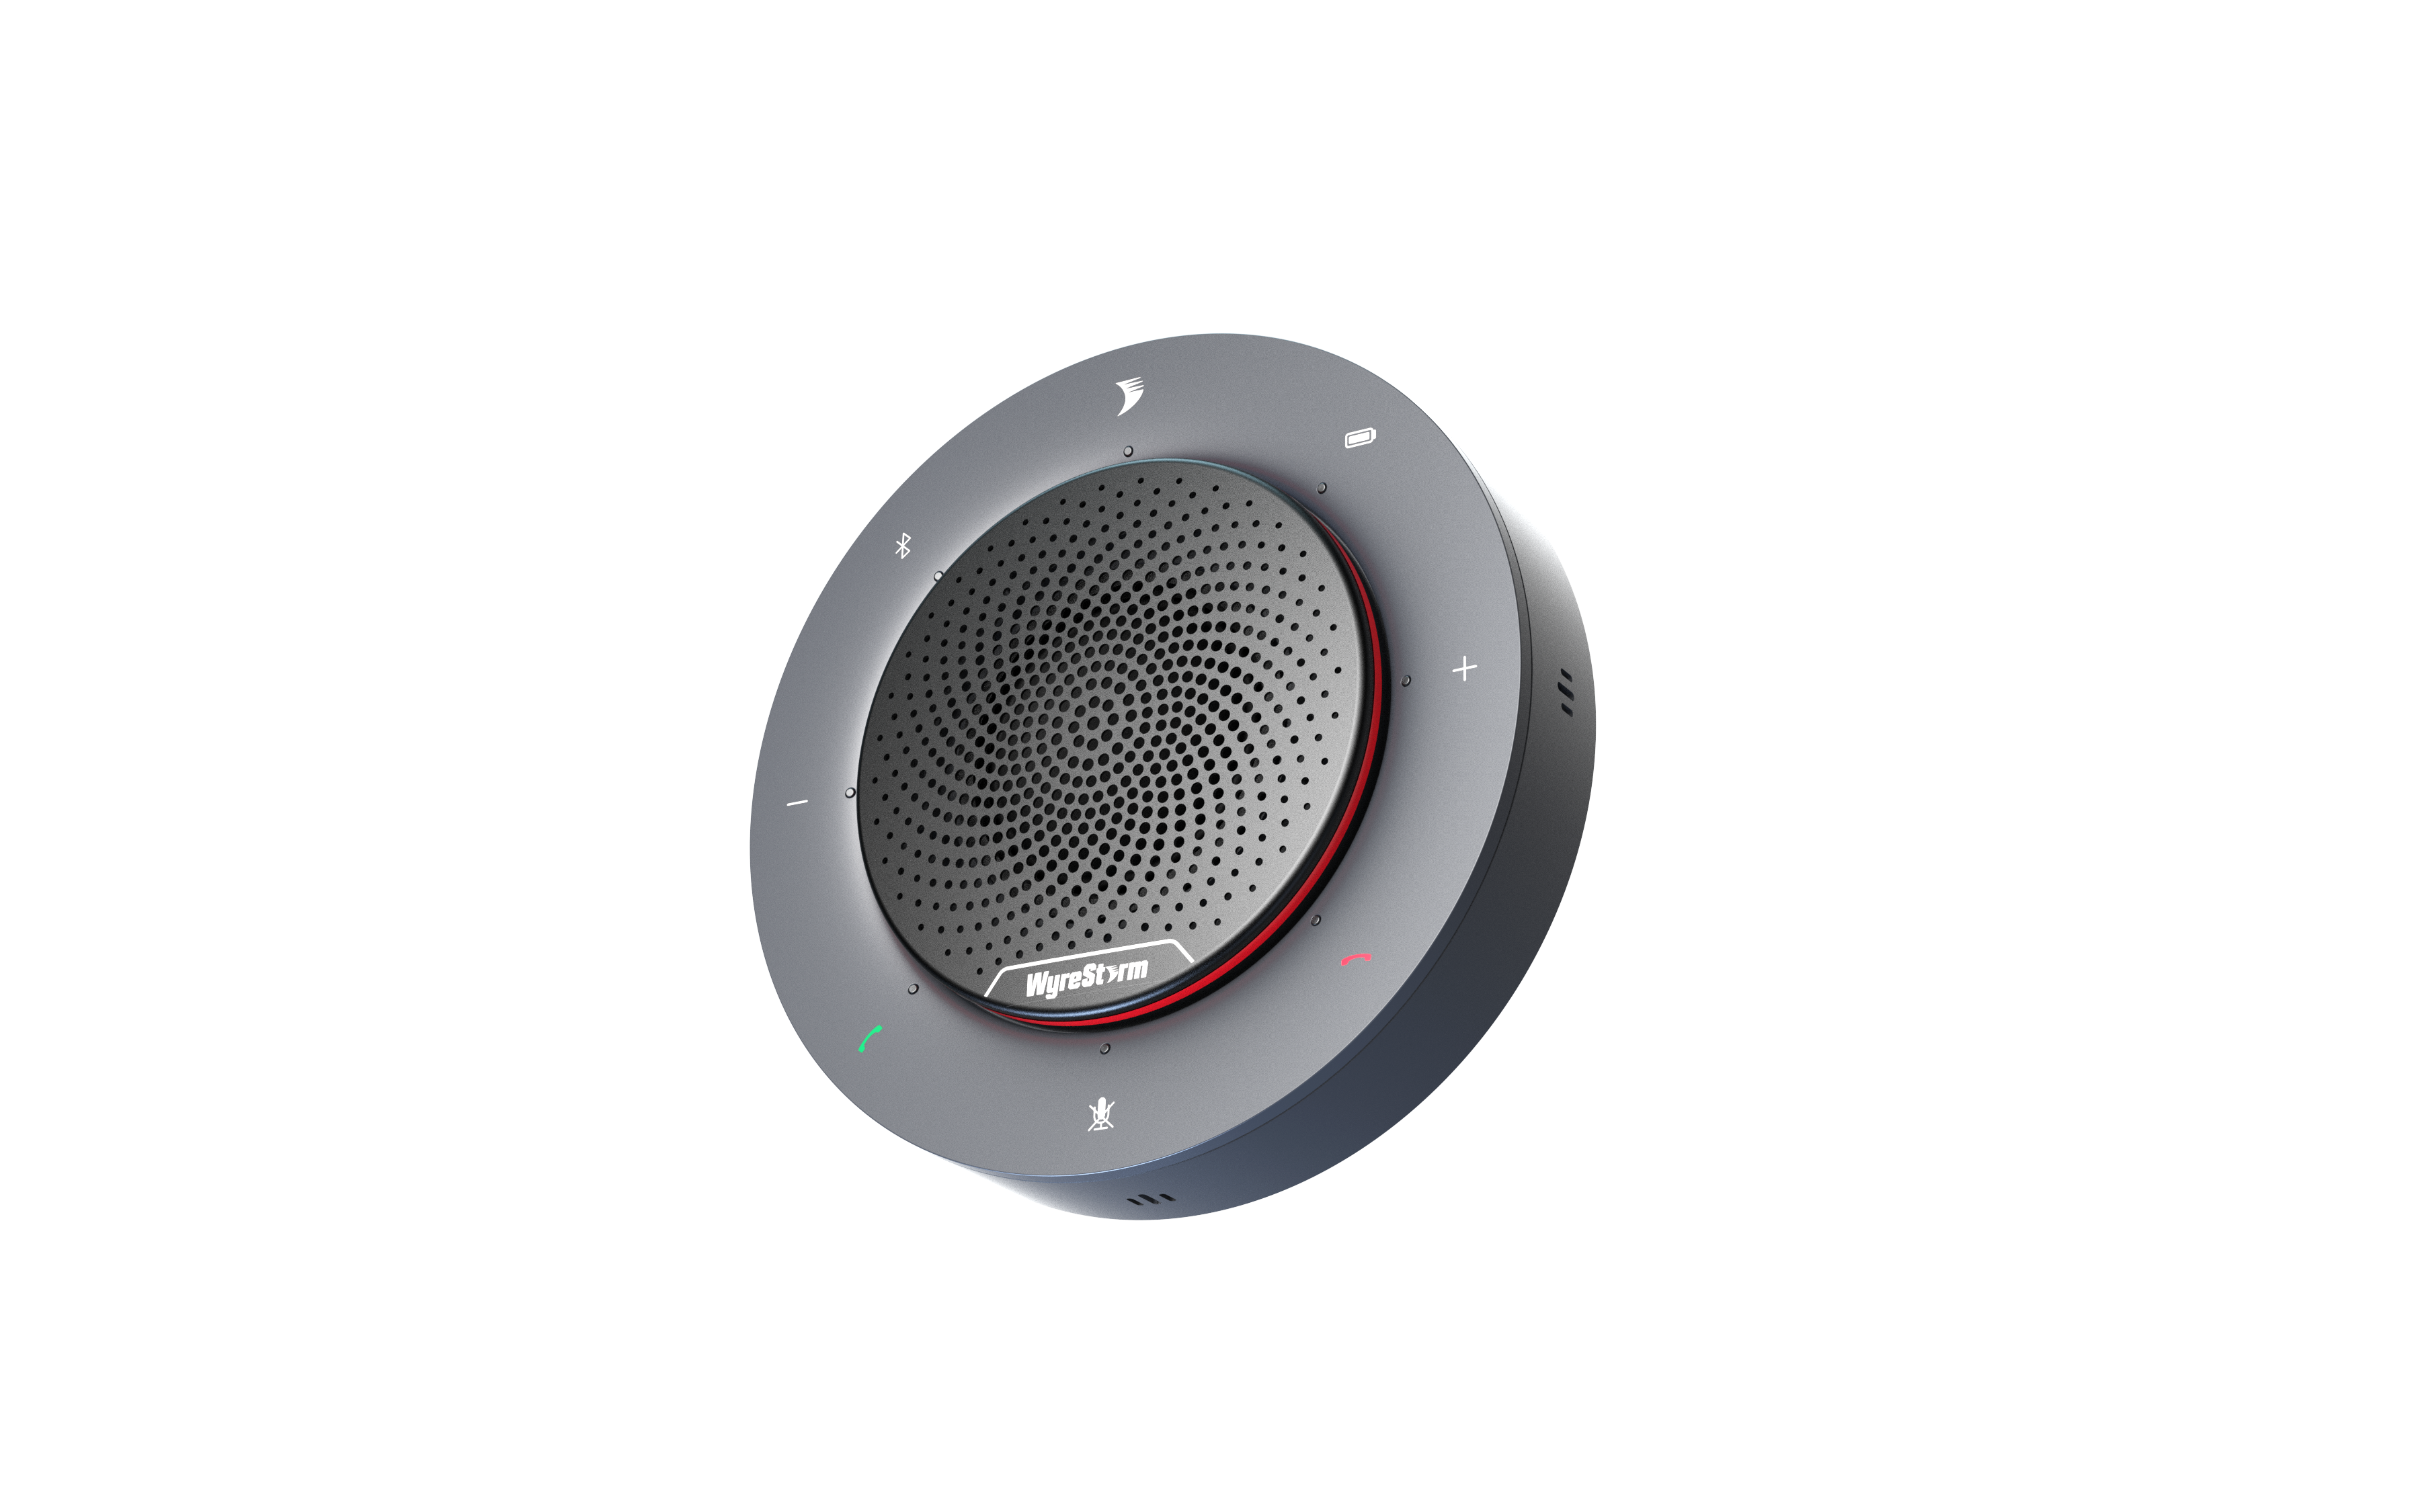 WyreStorm Introduces HALO 60 Bluetooth Conference Speakerphone to Provide Professional Audio for Home Office and Meeting Room